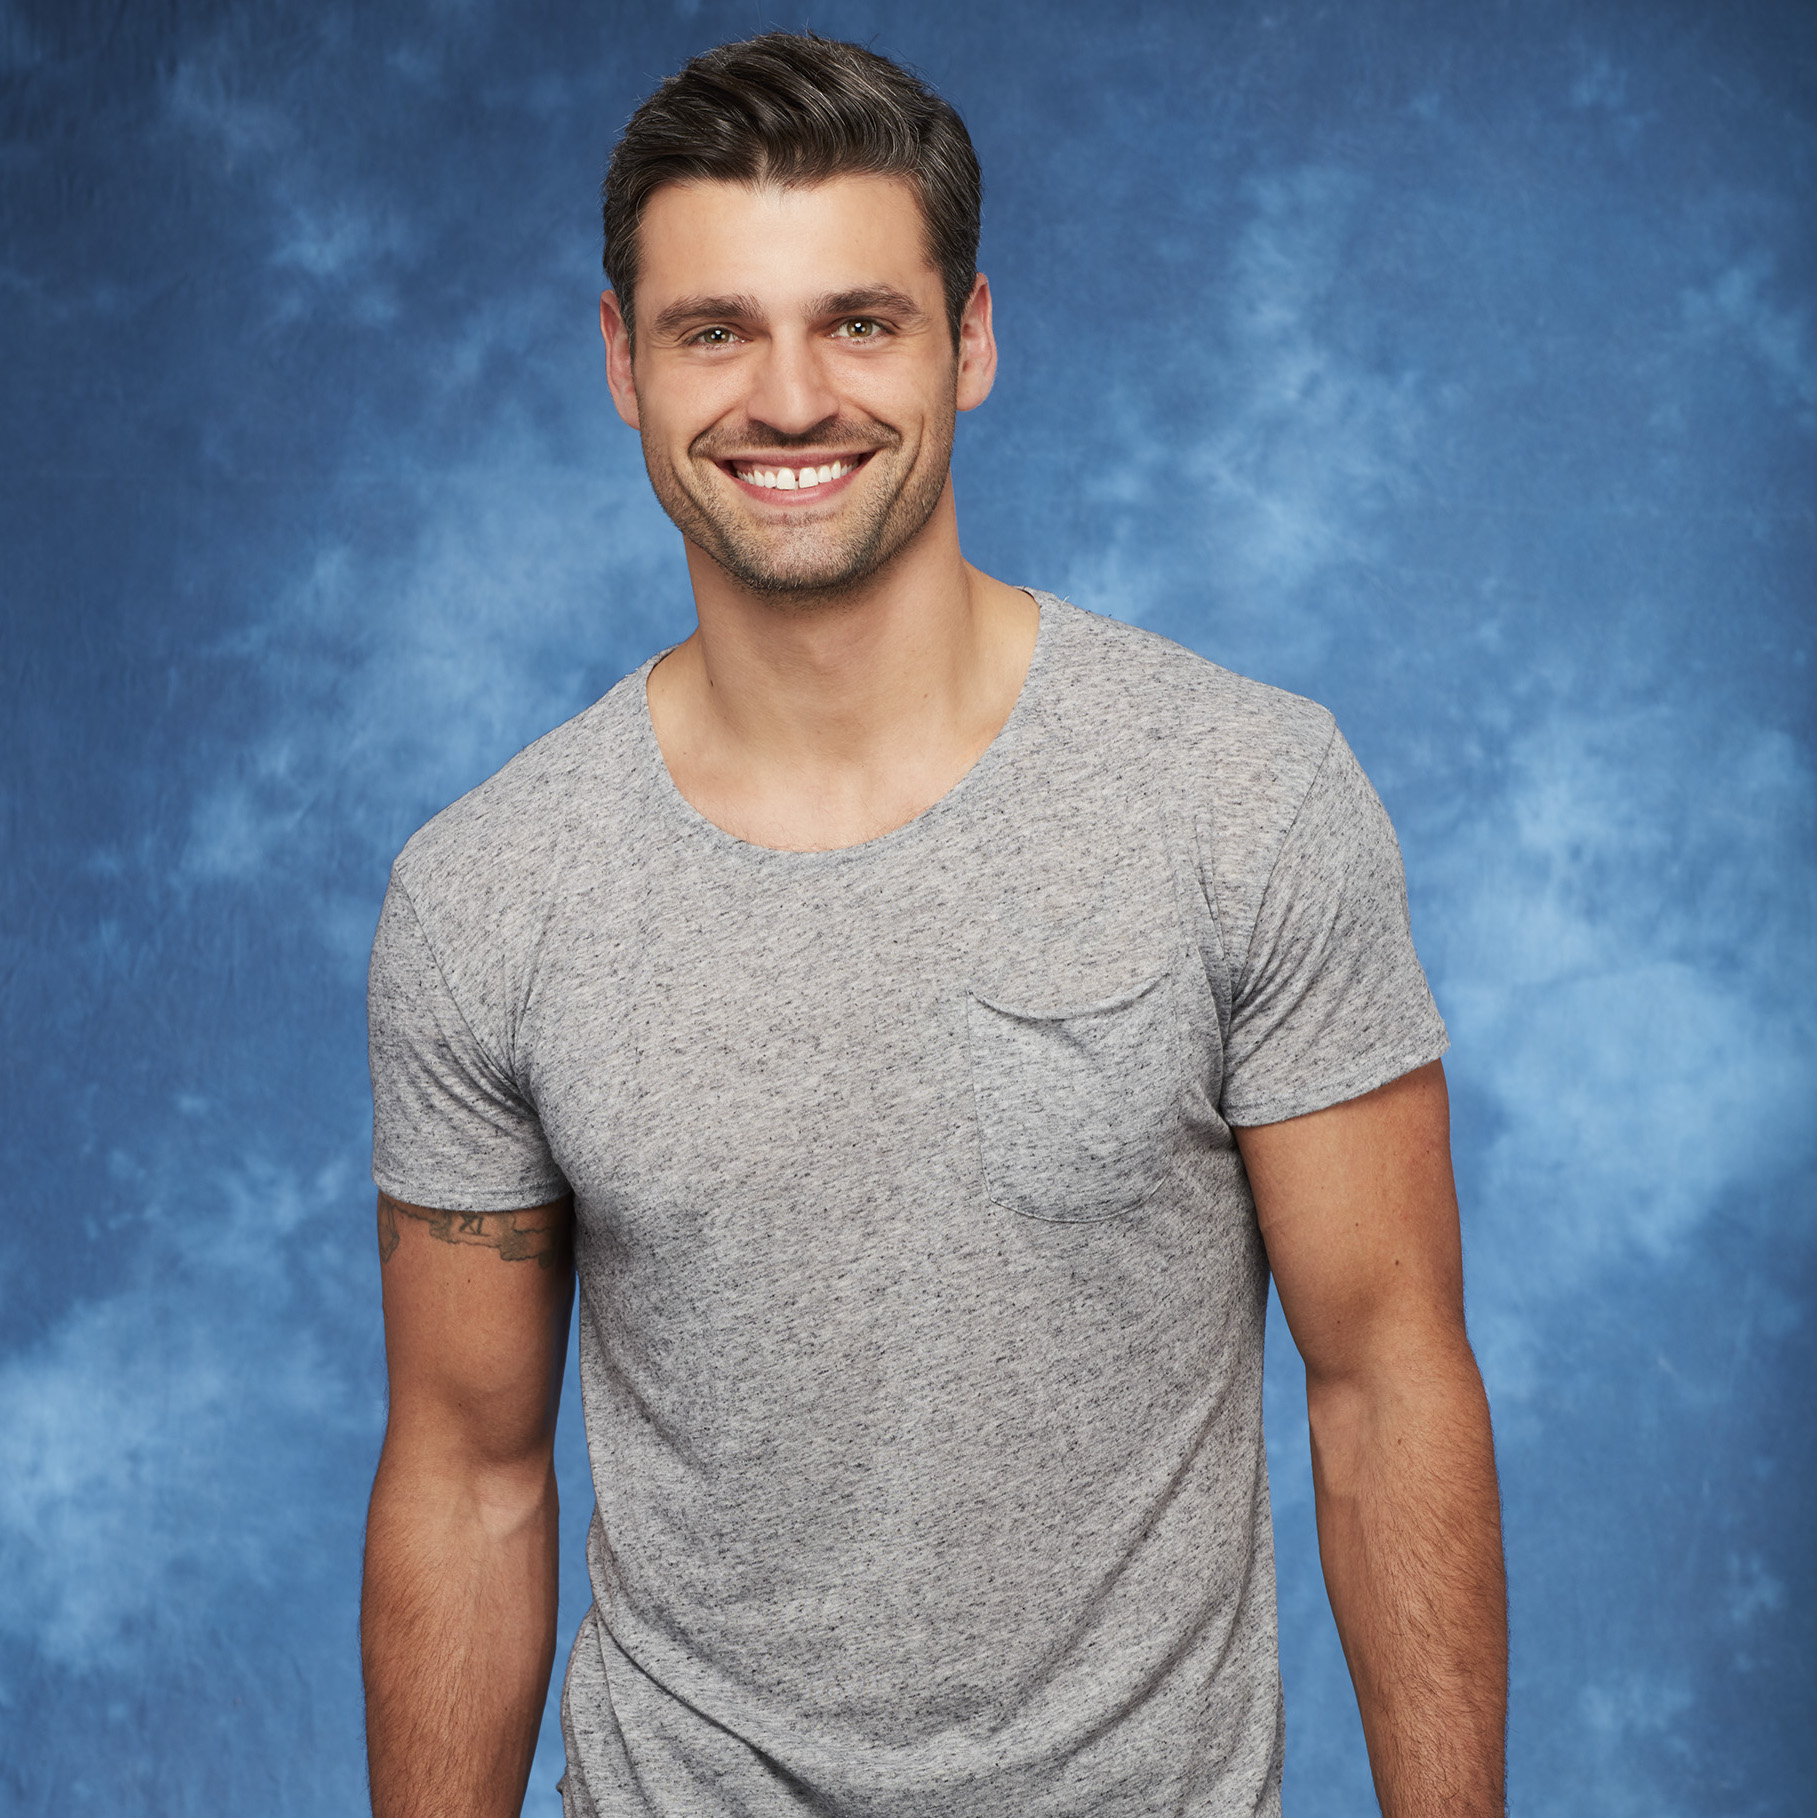 The Bachelorette Hometown Date Spoilers Here's What We Know!